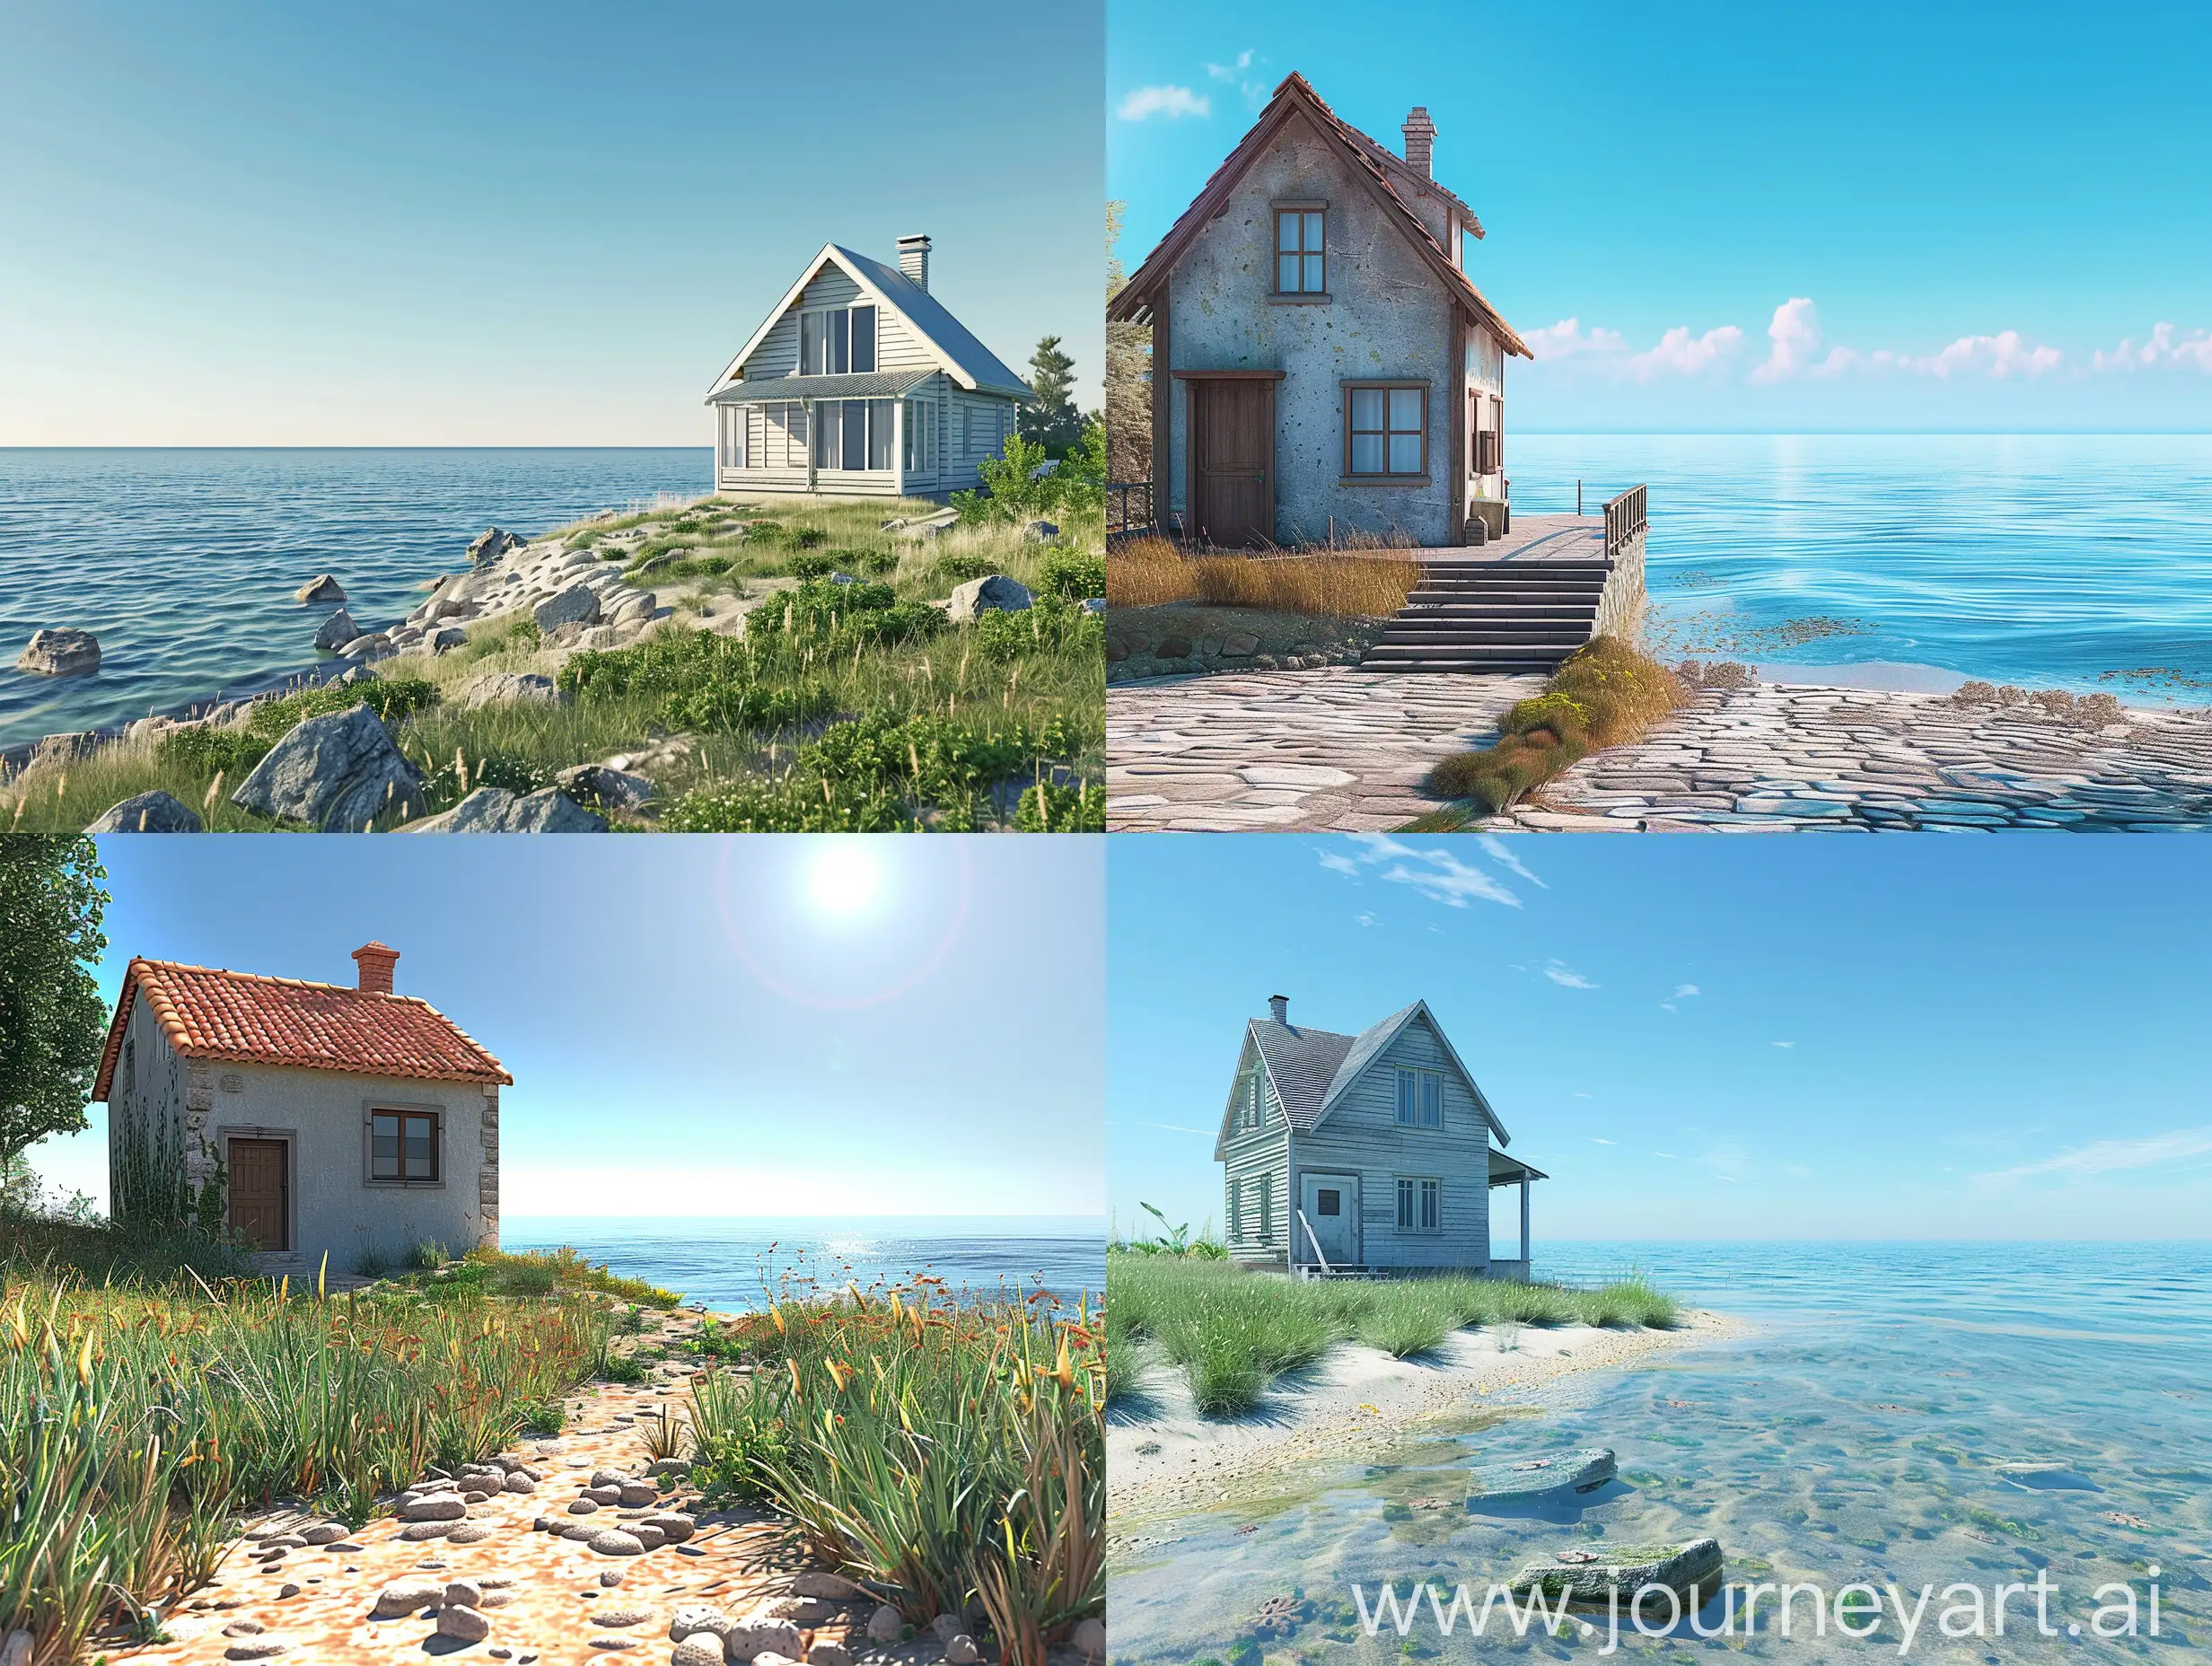 Seaside-Cottage-with-Ocean-View-Under-Clear-Skies